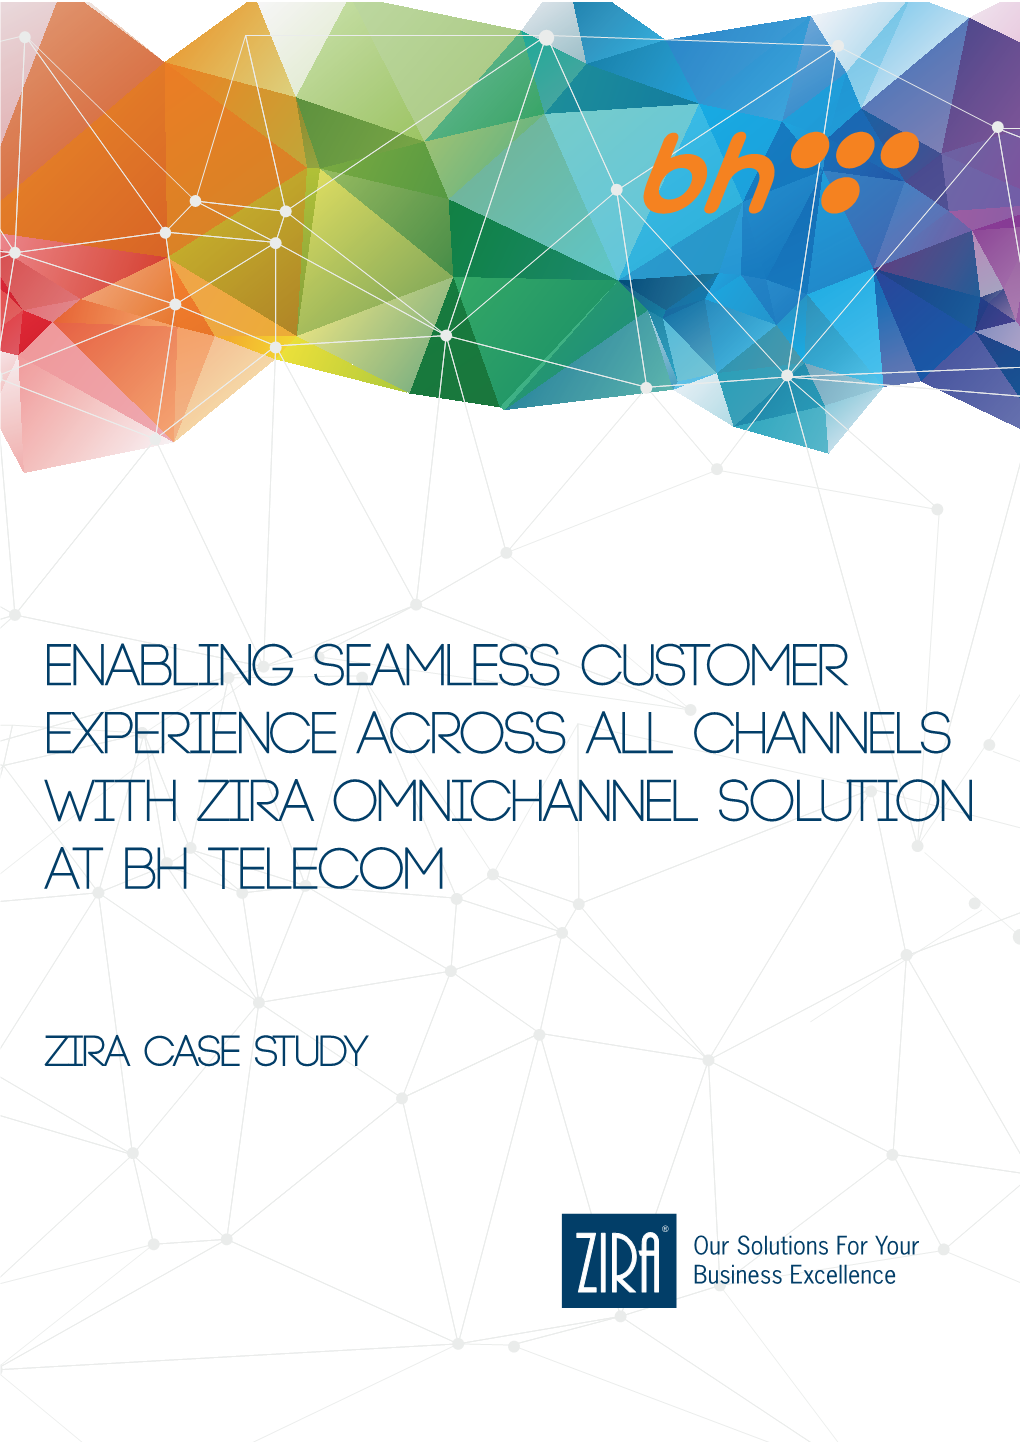 Enabling Seamless Customer Experience Across All Channels with ZIRA Omnichannel Solution at BH Telecom